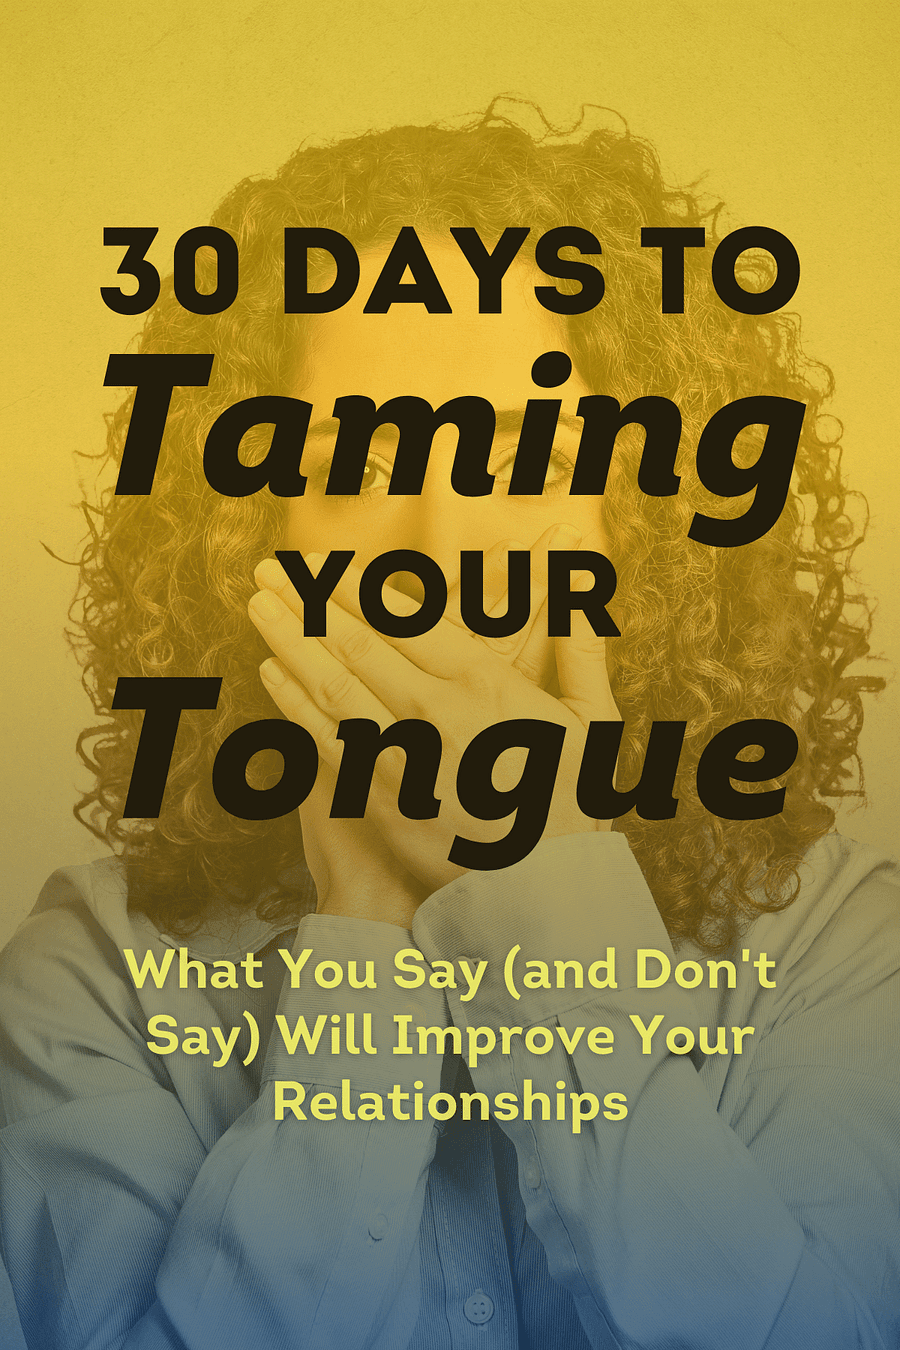 30 Days to Taming Your Tongue by Deborah Smith Pegues - Book Summary